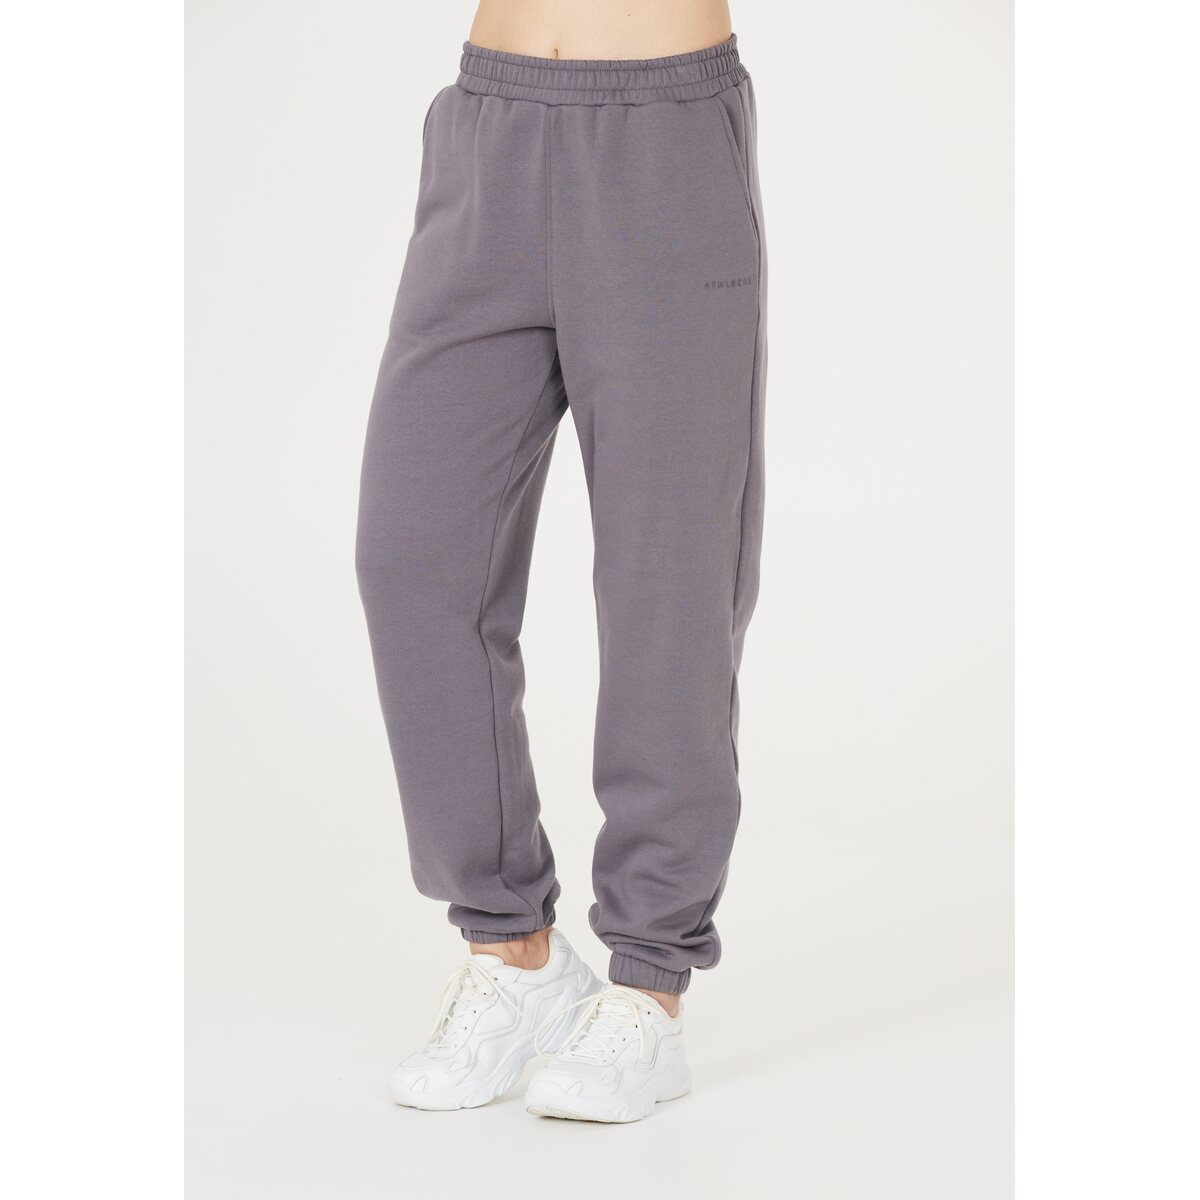 Athlecia Ruthie Womenswear Sweat Pants 2 Shaws Department Stores